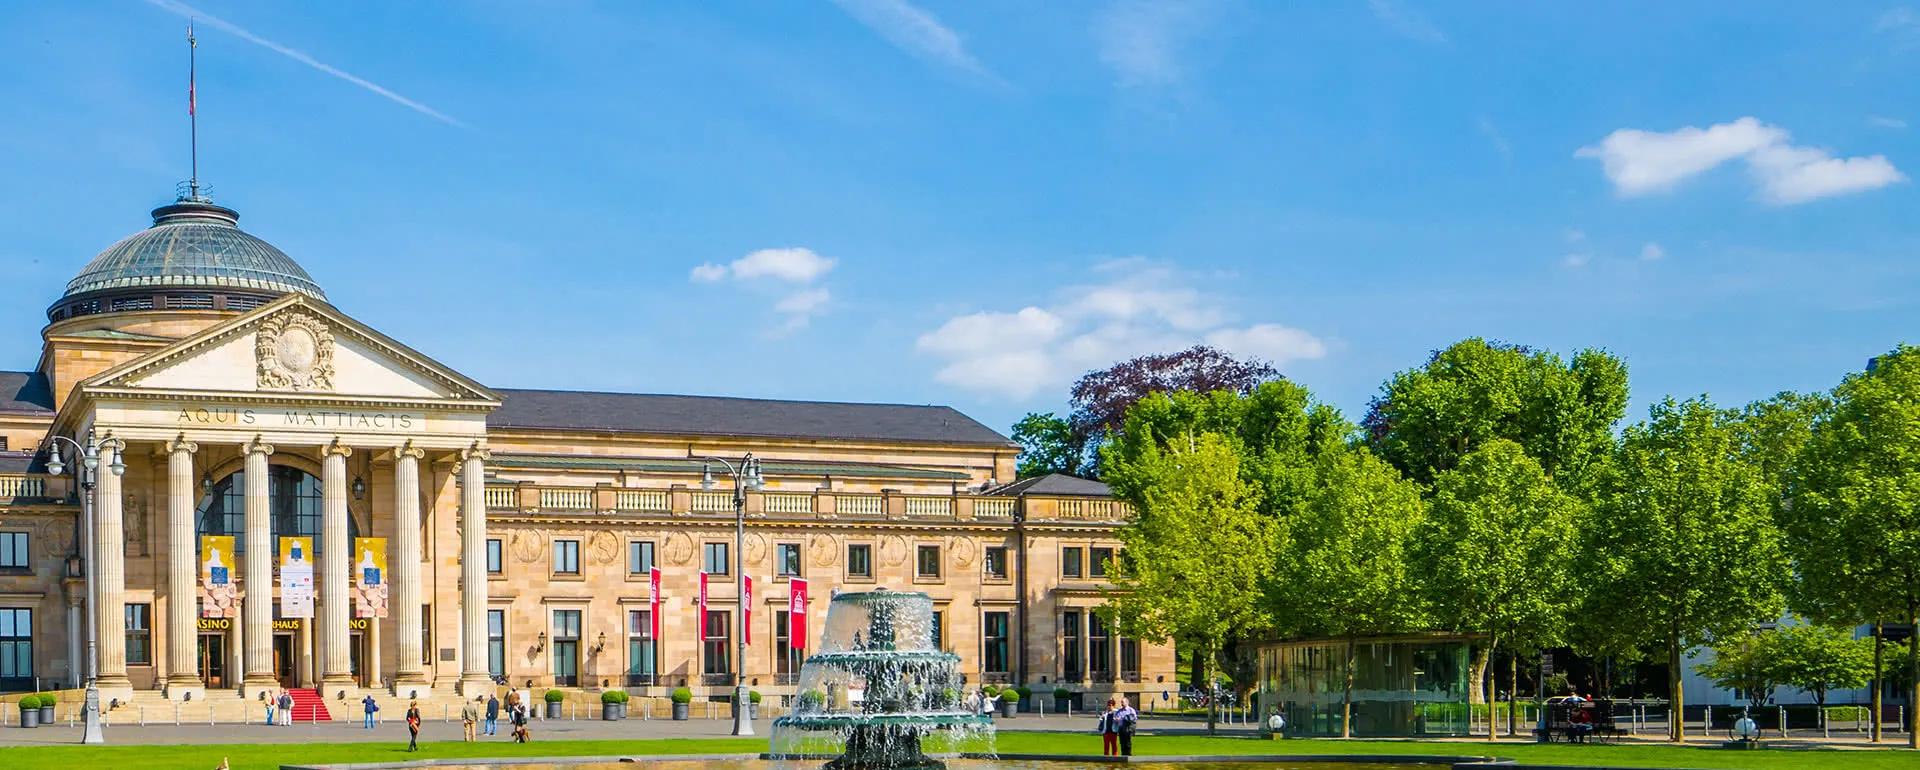 Wiesbaden - the destination for company trips